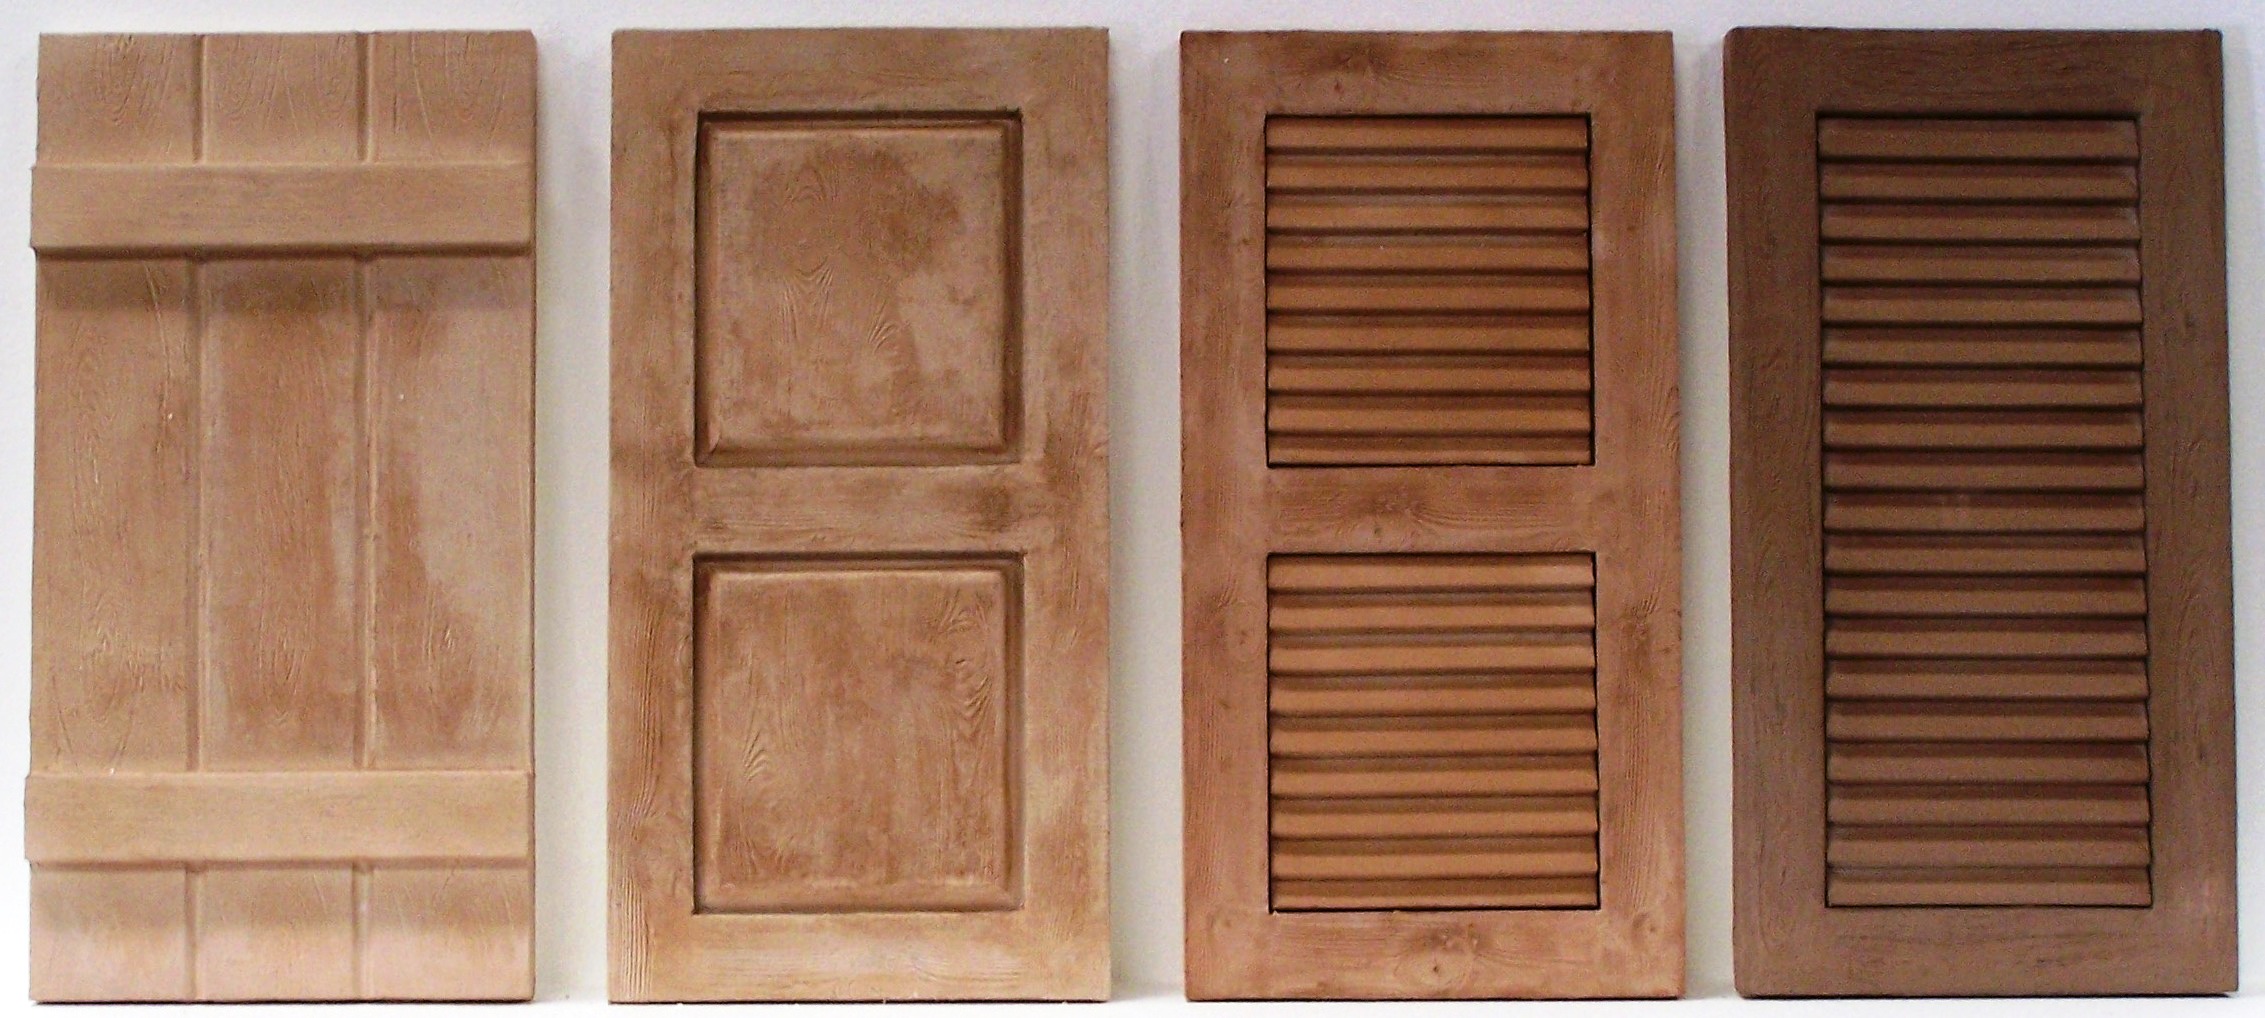 Stylish wood shutters for privacy and elegance – CareHomeDecor